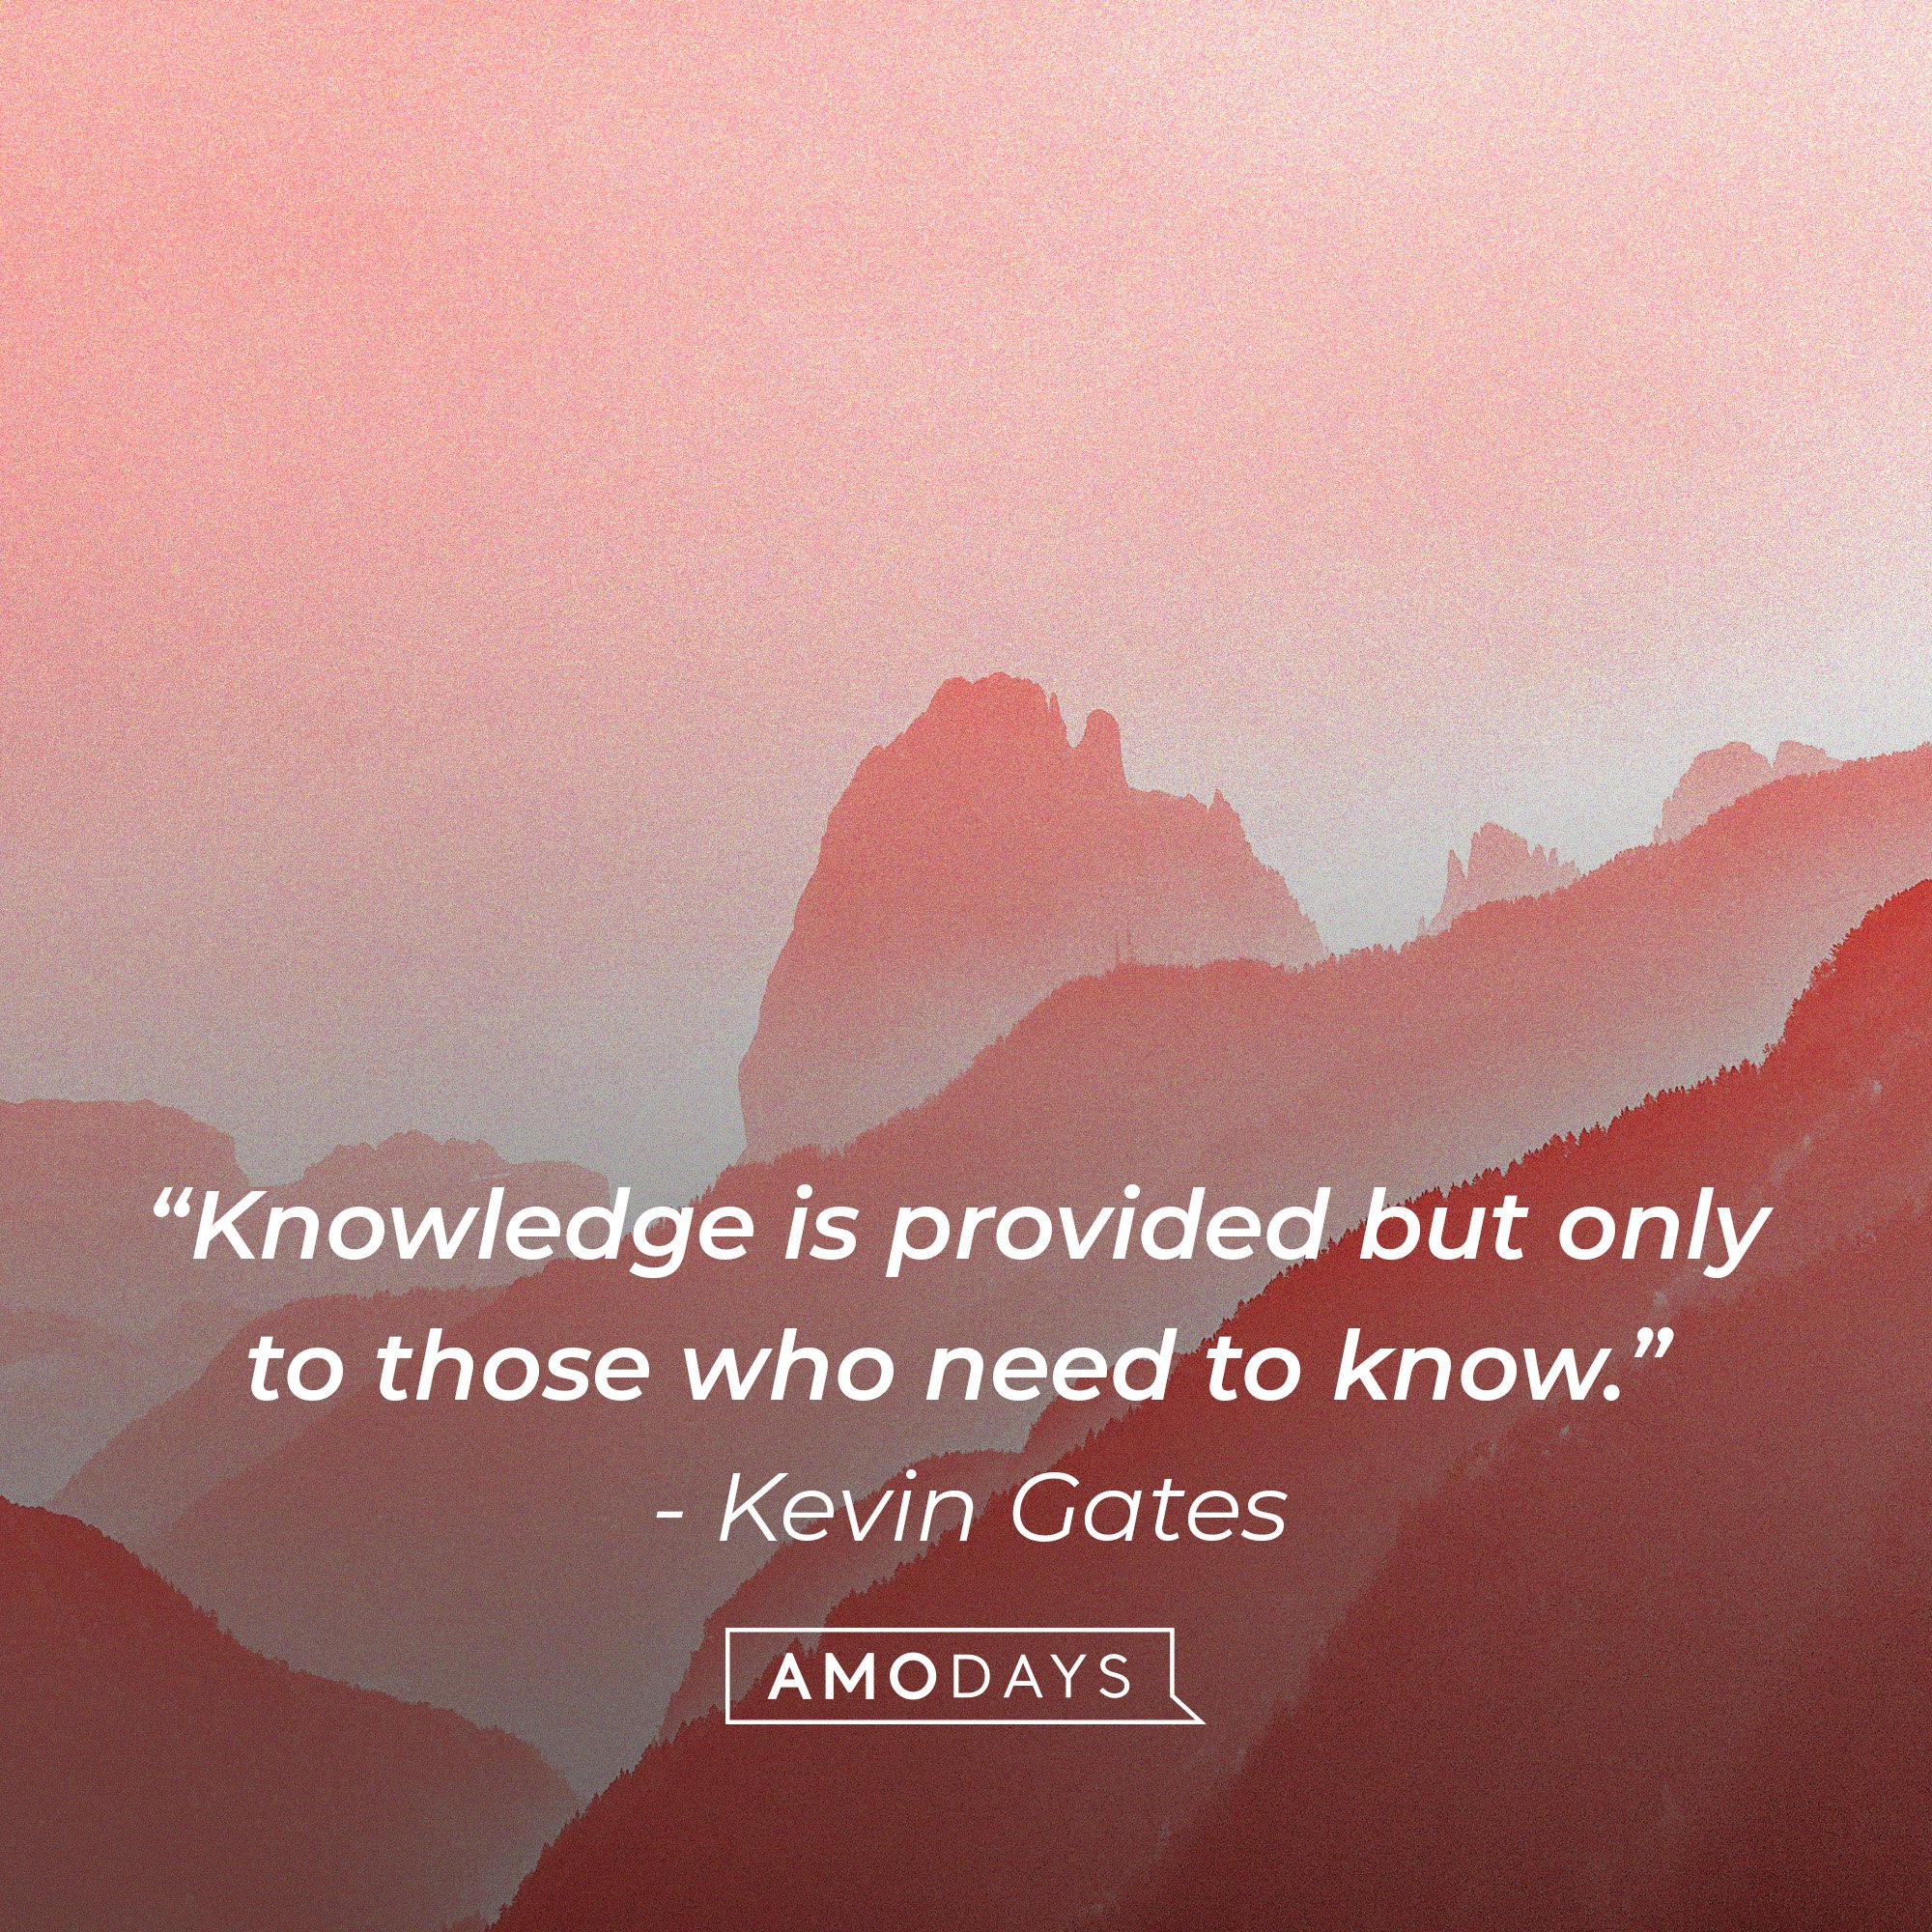 Kevin Gates’ quote: “Knowledge is provided but only to those who need to know.”  |  Image: AmoDays